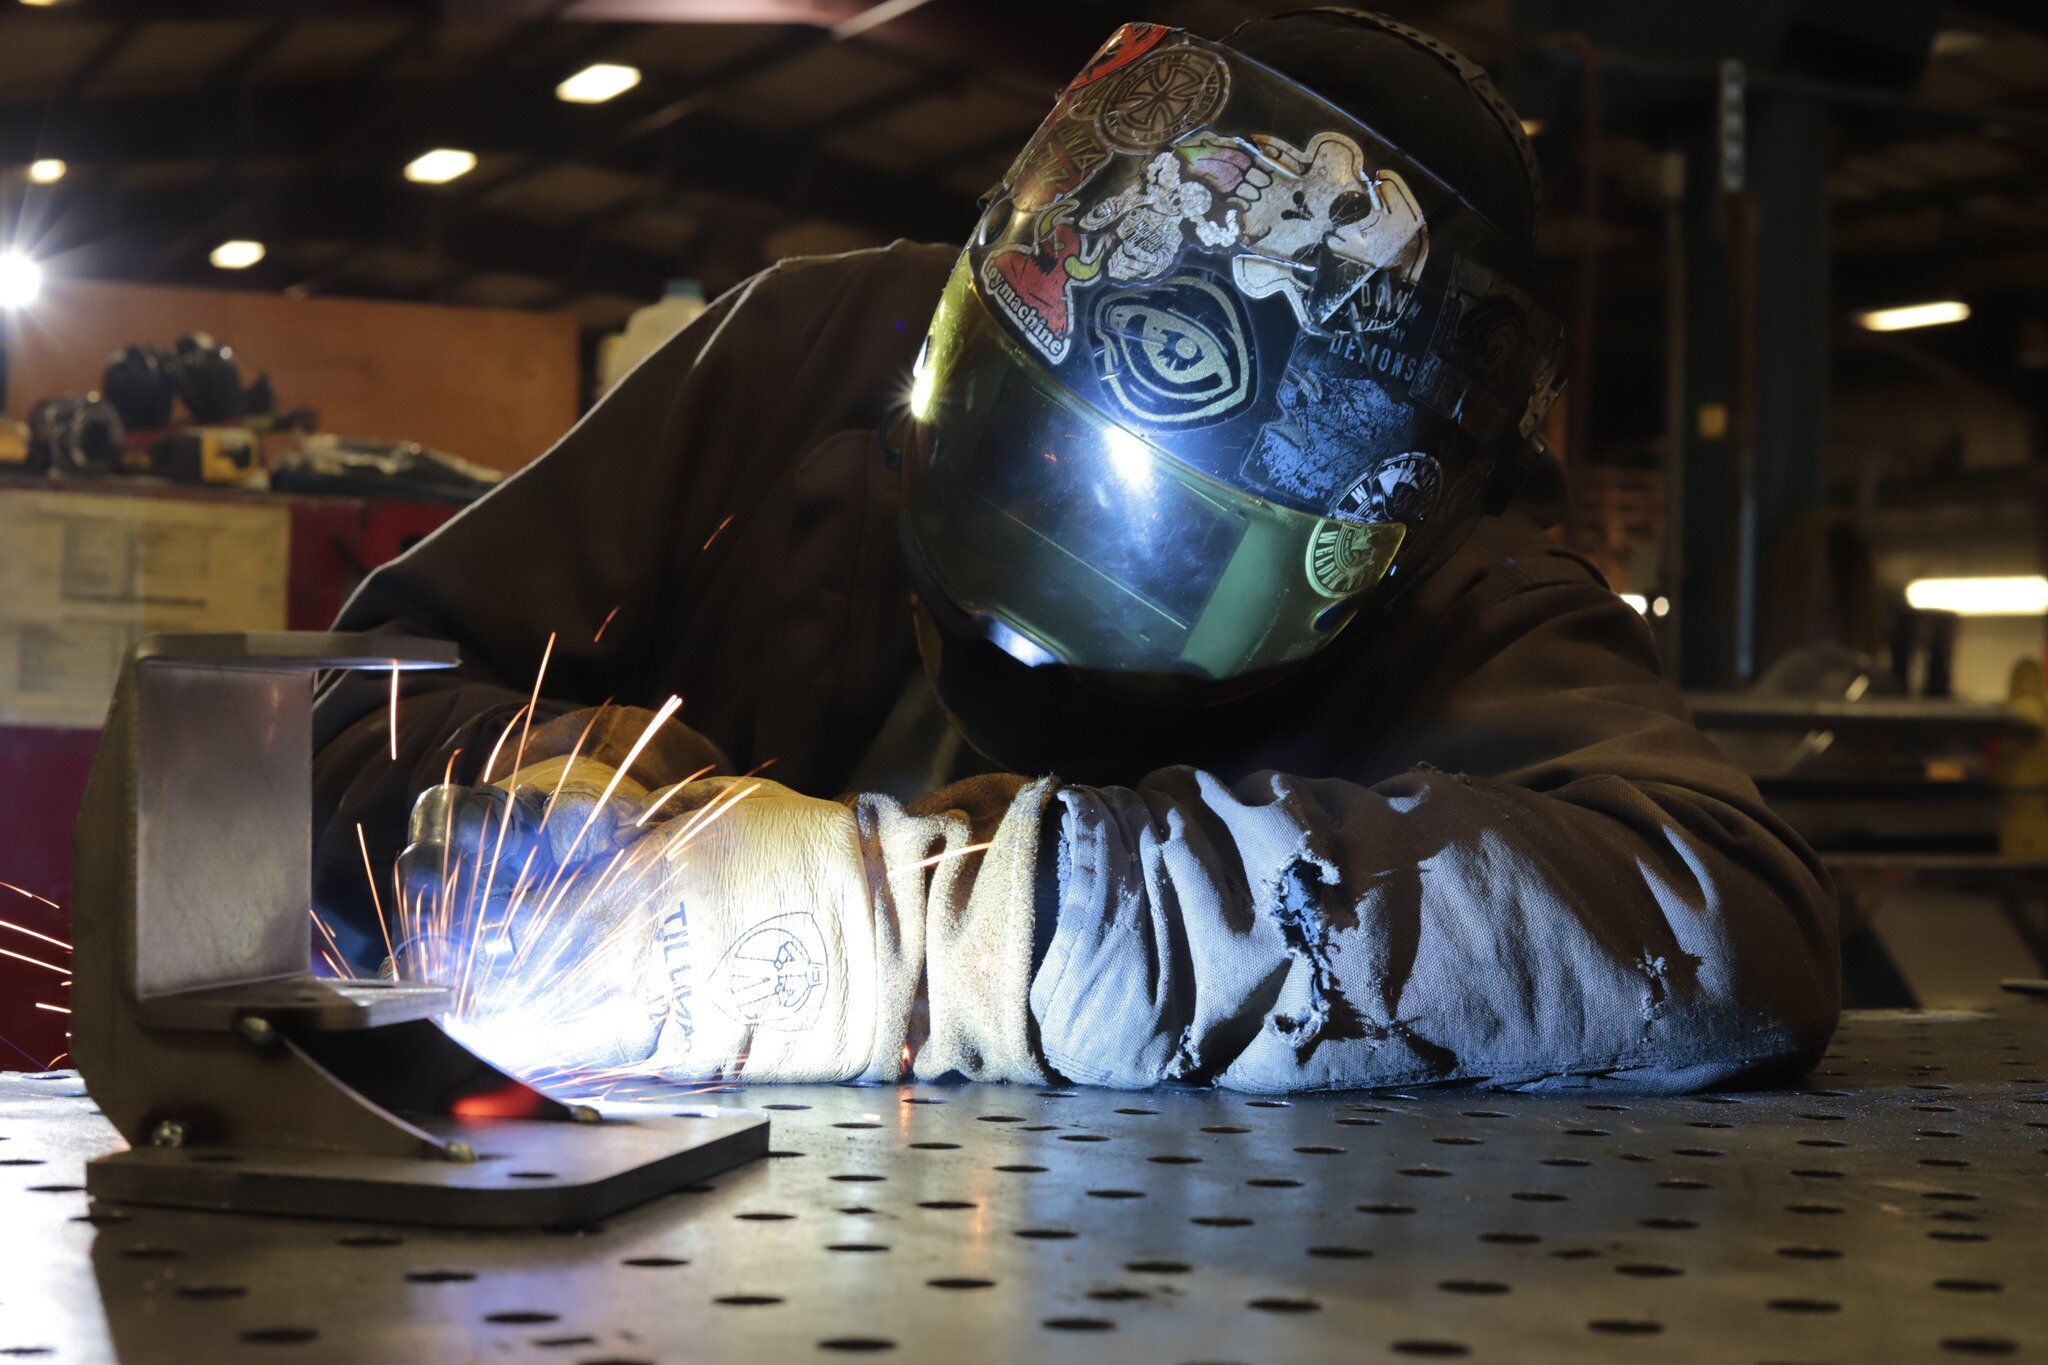 Our welders are at the ready for every new project that comes their way. No matter how you get it done, we'll get you the best-finished product. 🔥

#WesternDesignFab 
#sparksfly 
#metal